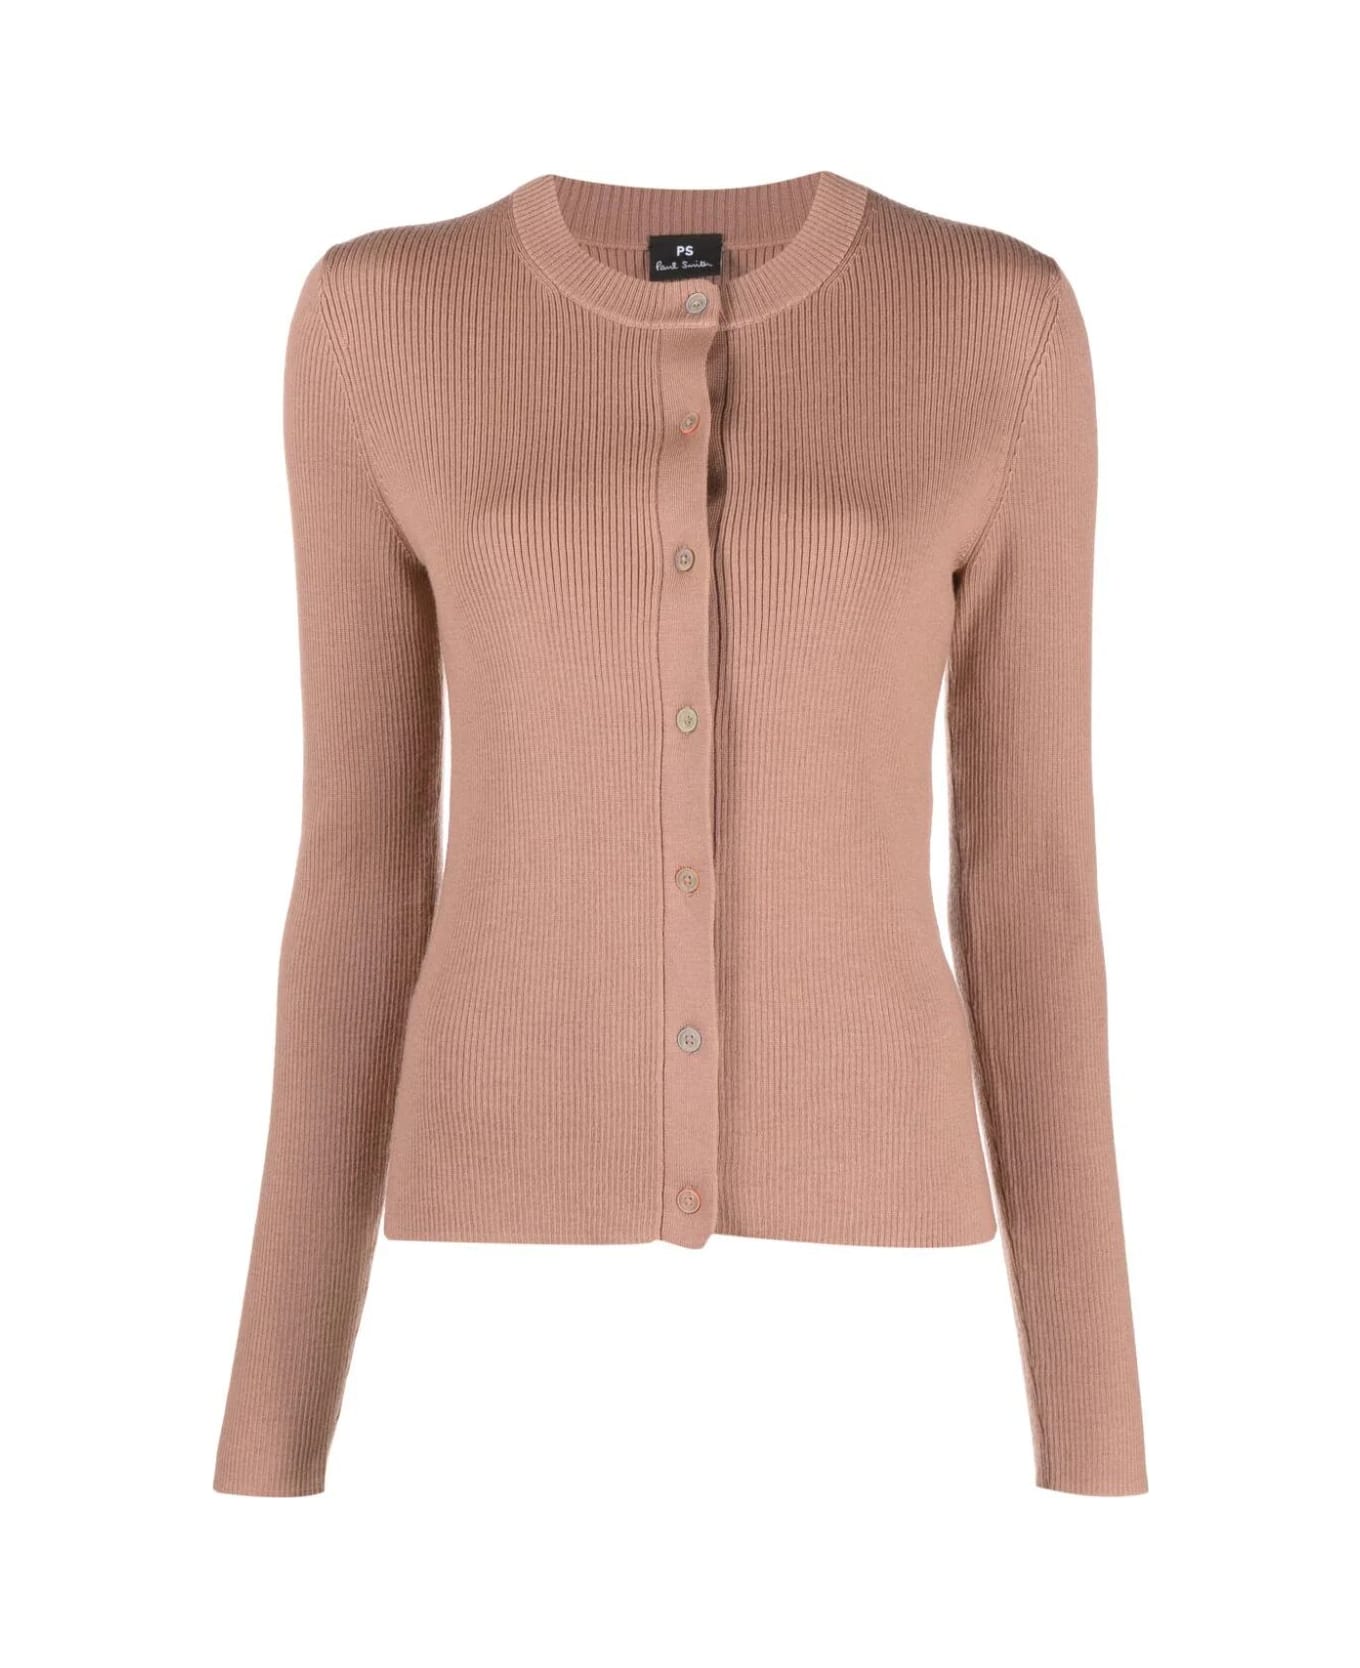 PS by Paul Smith Knitted Buttoned Cardigan - Tan